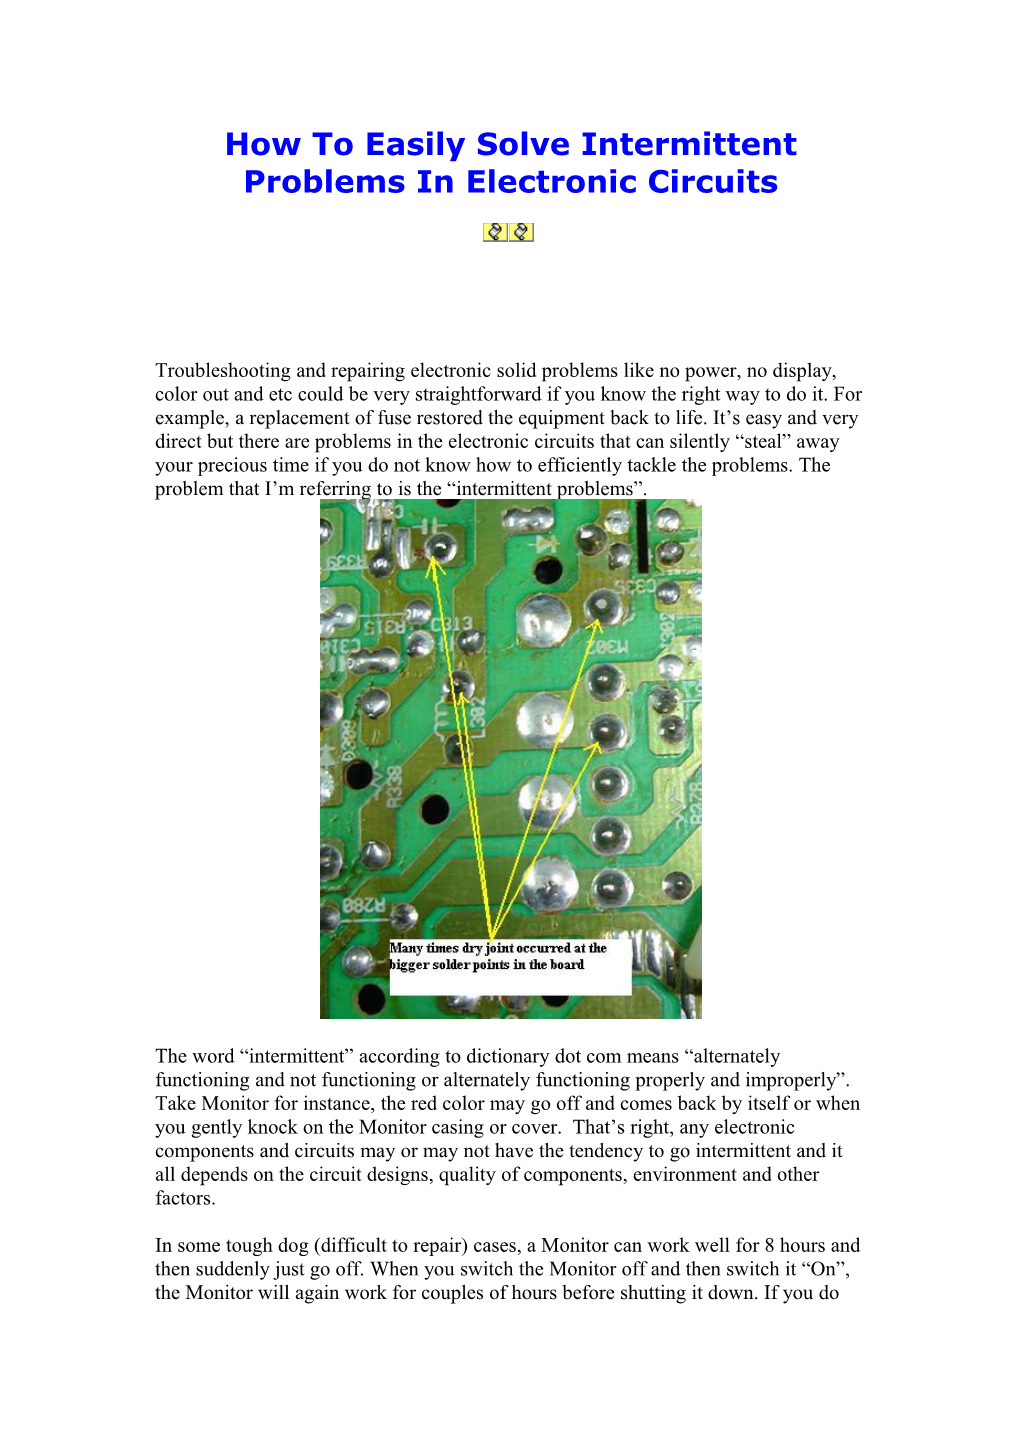 How to Easily Solve Intermittent Problems in Electronic Circuits